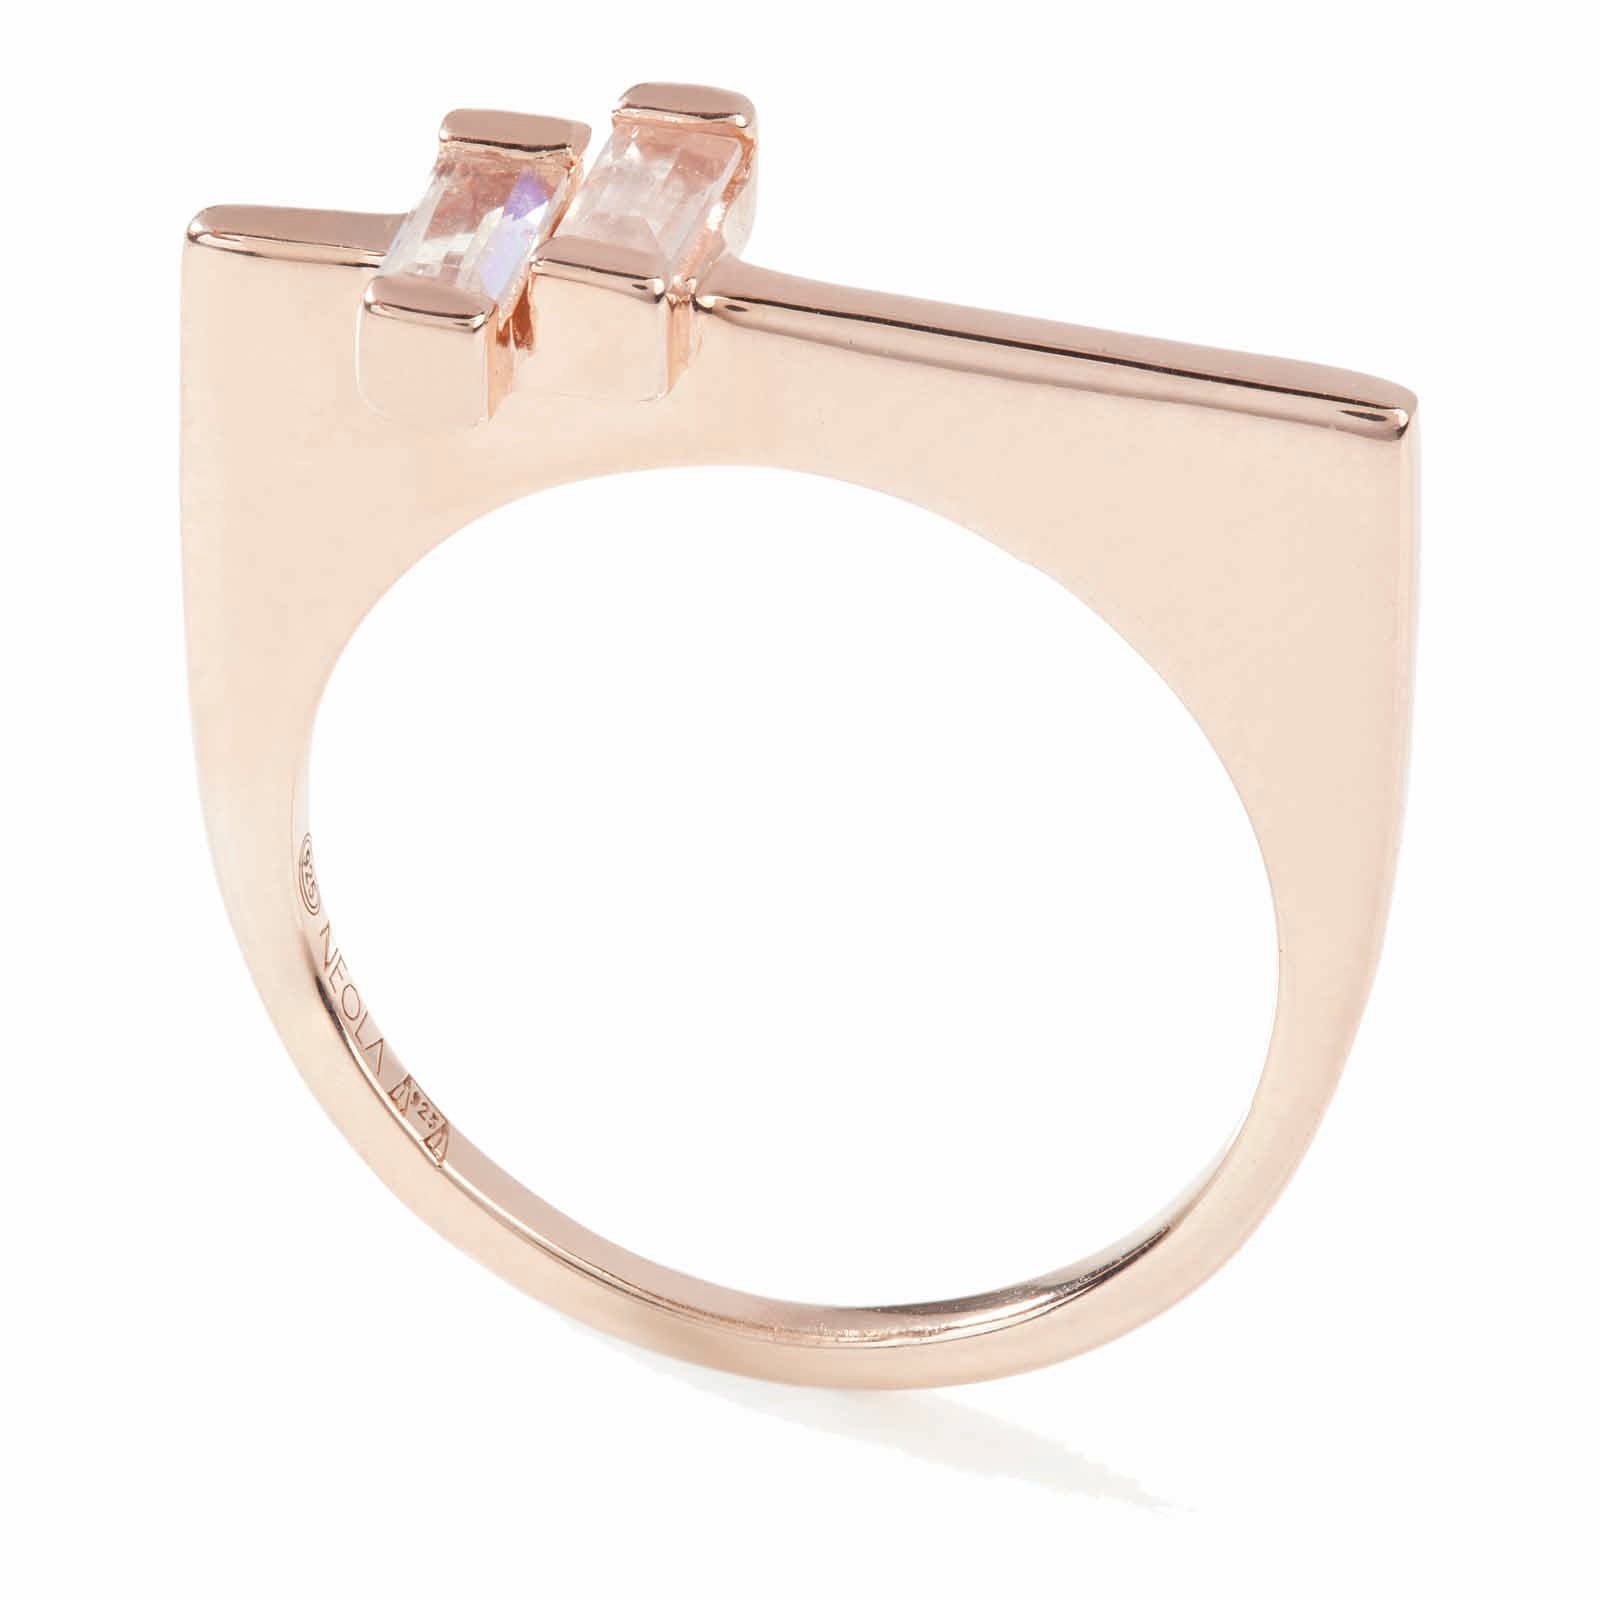 18ct rose gold vermeil set insterling silver. Anais ring with rose quartz. Fine British jewellery ethically handmade